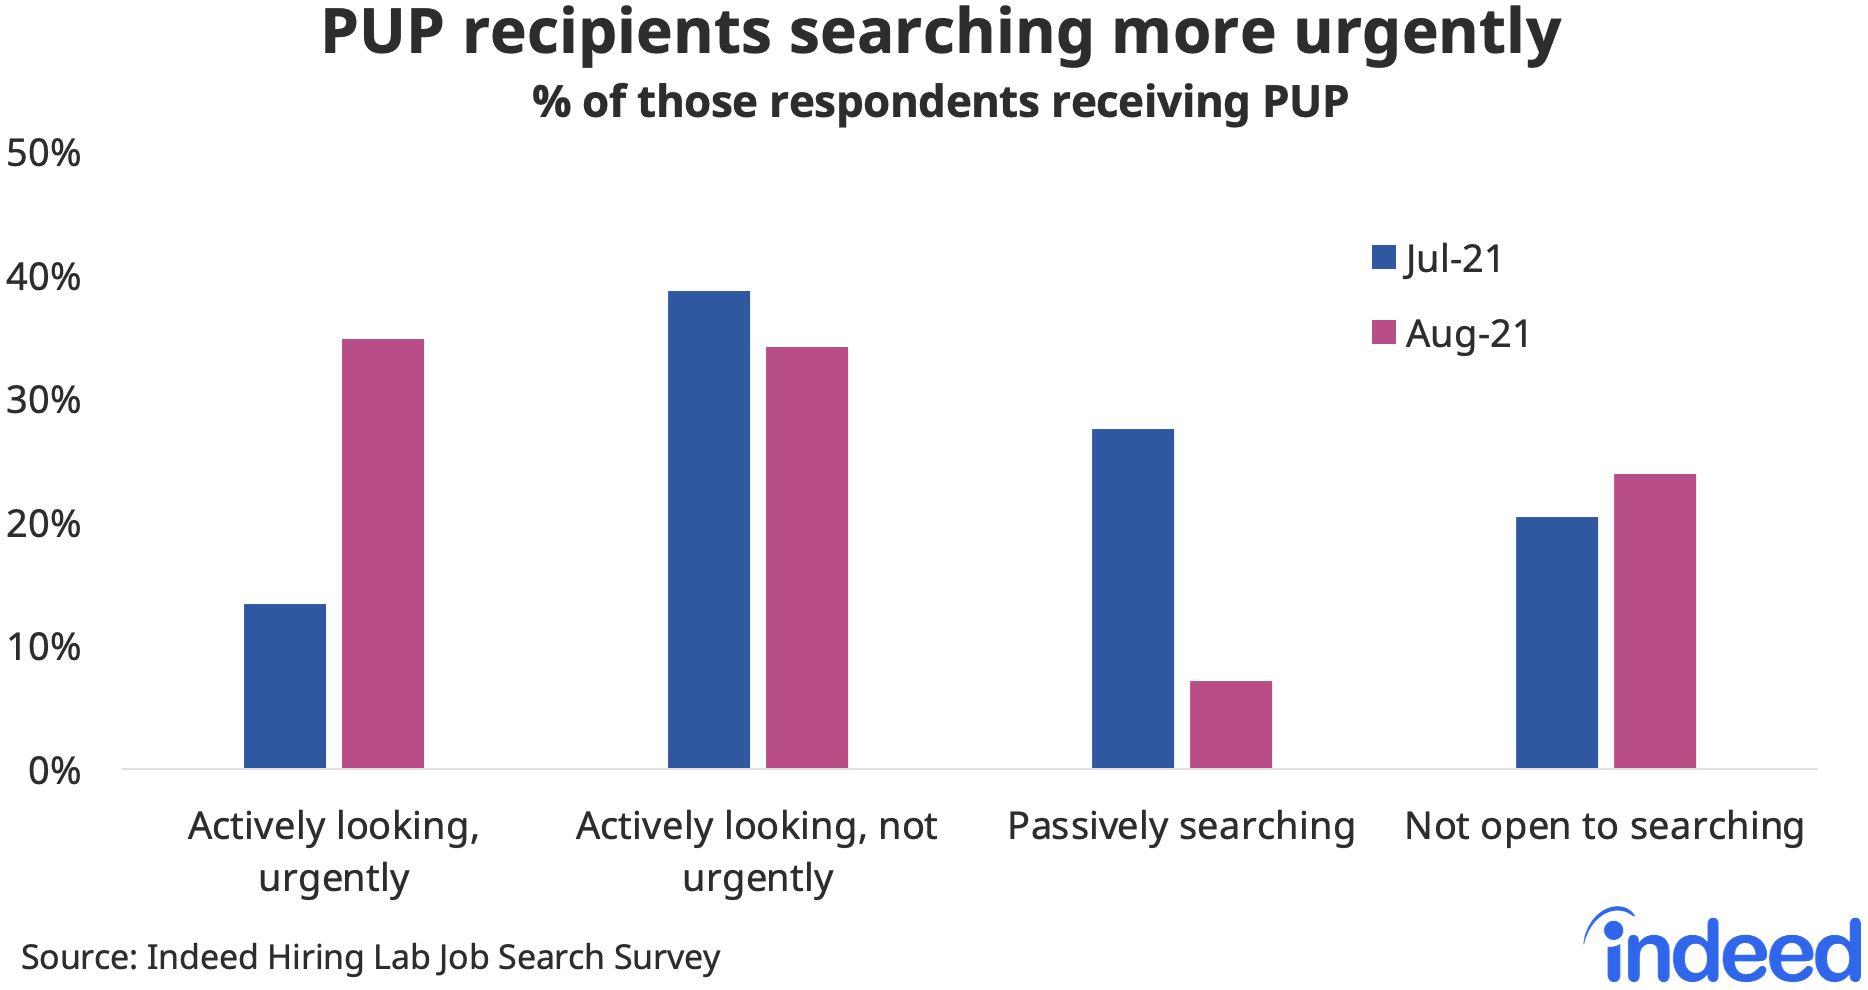 Bar chart titled “PUP recipients searching more urgently.”